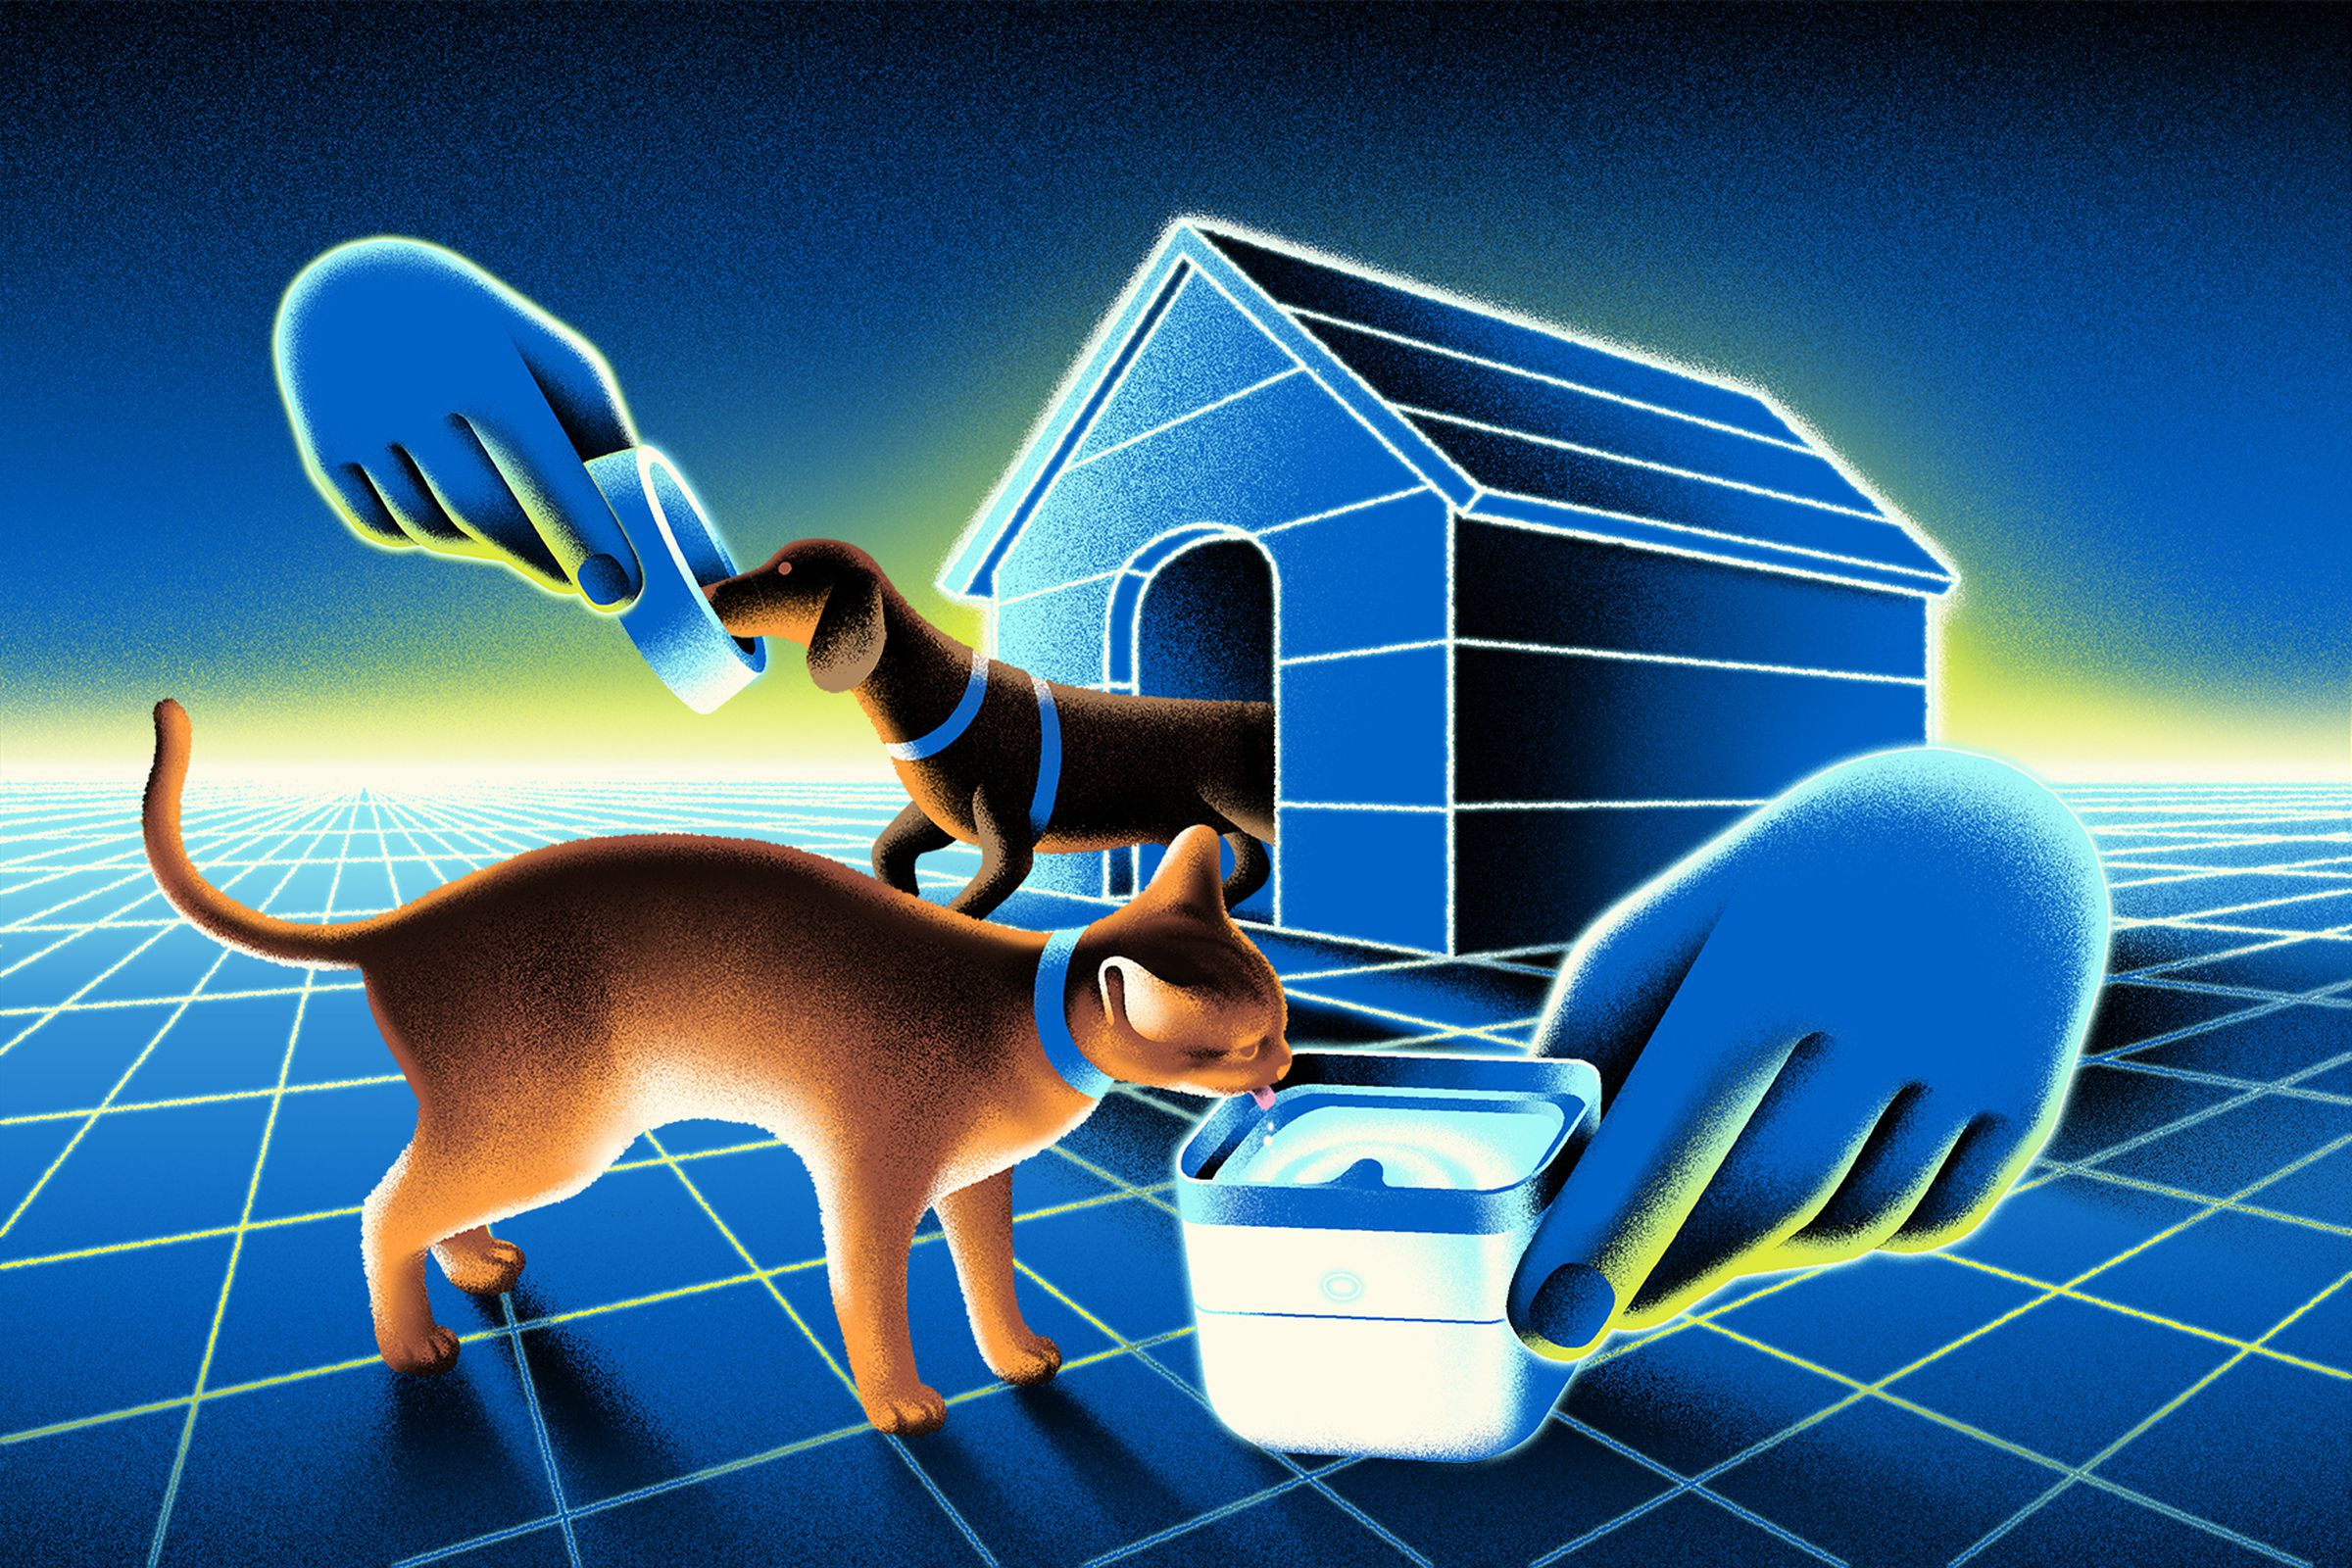 Illustration of a cat and dog being fed by automated digital hands.